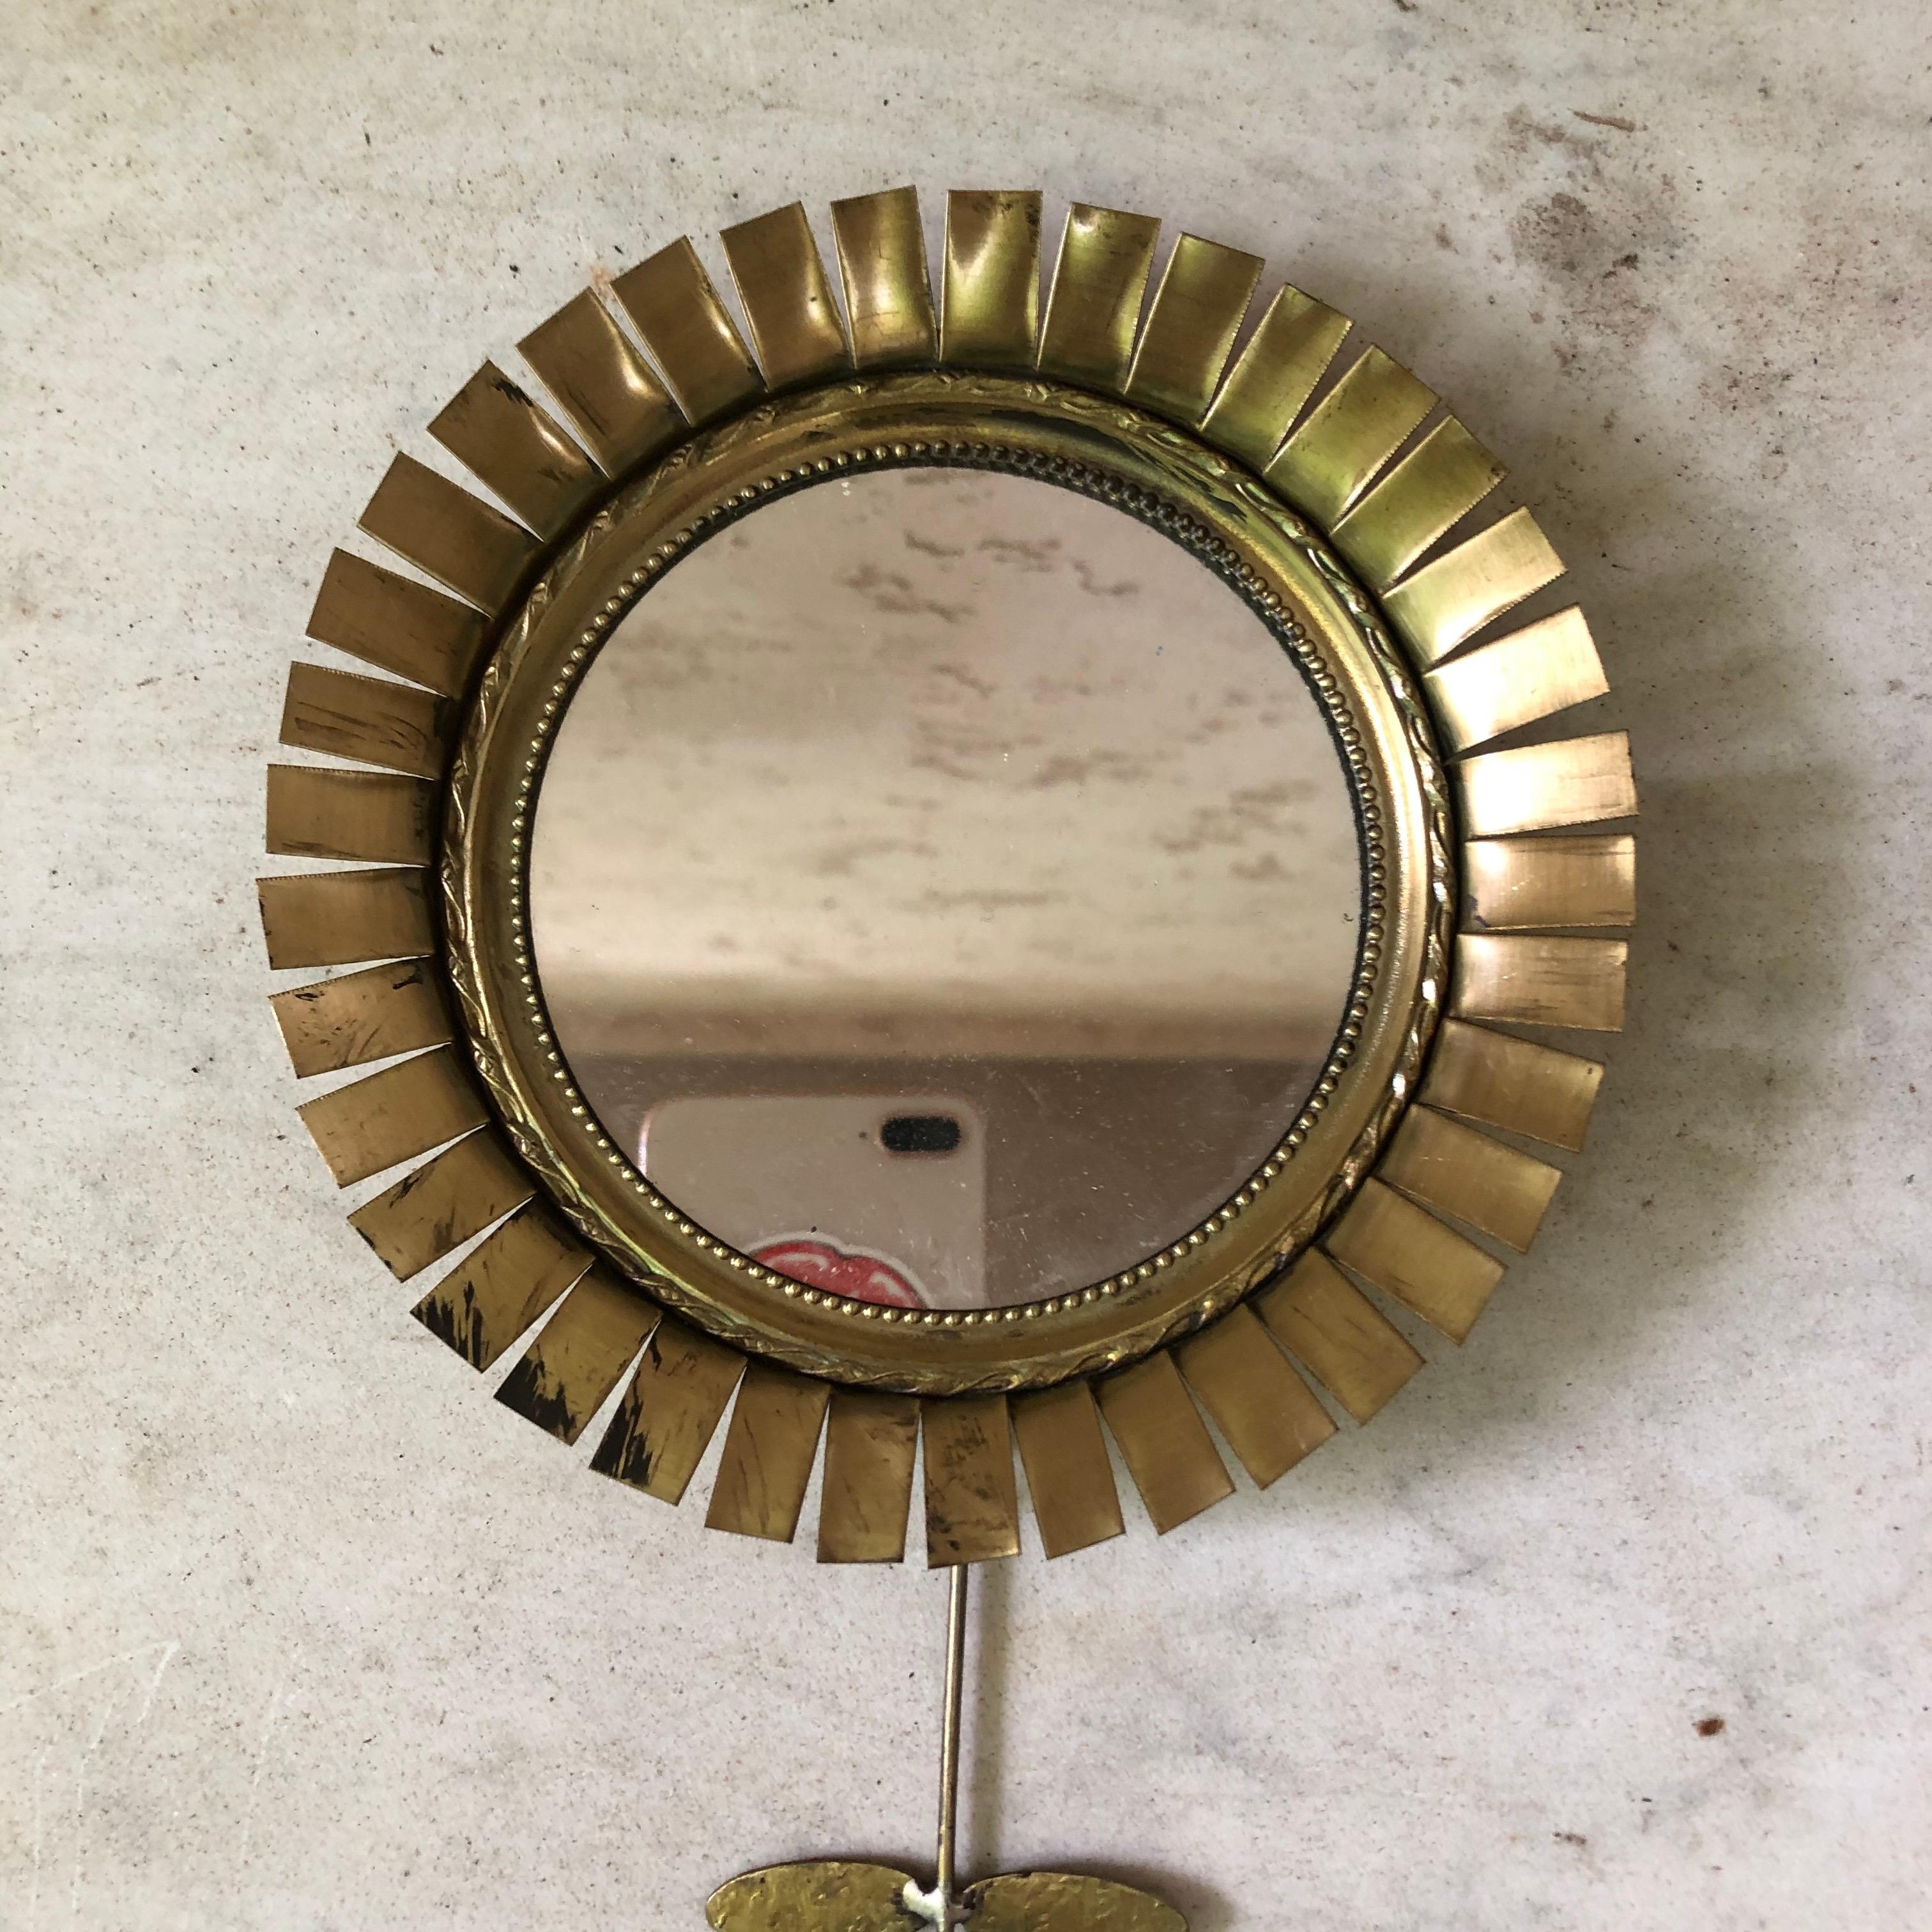 Small French gold metal flower mirror, circa 1960.
Measures: Mirror diameter / 5.8 inches.
Total height / 11.5 inches.